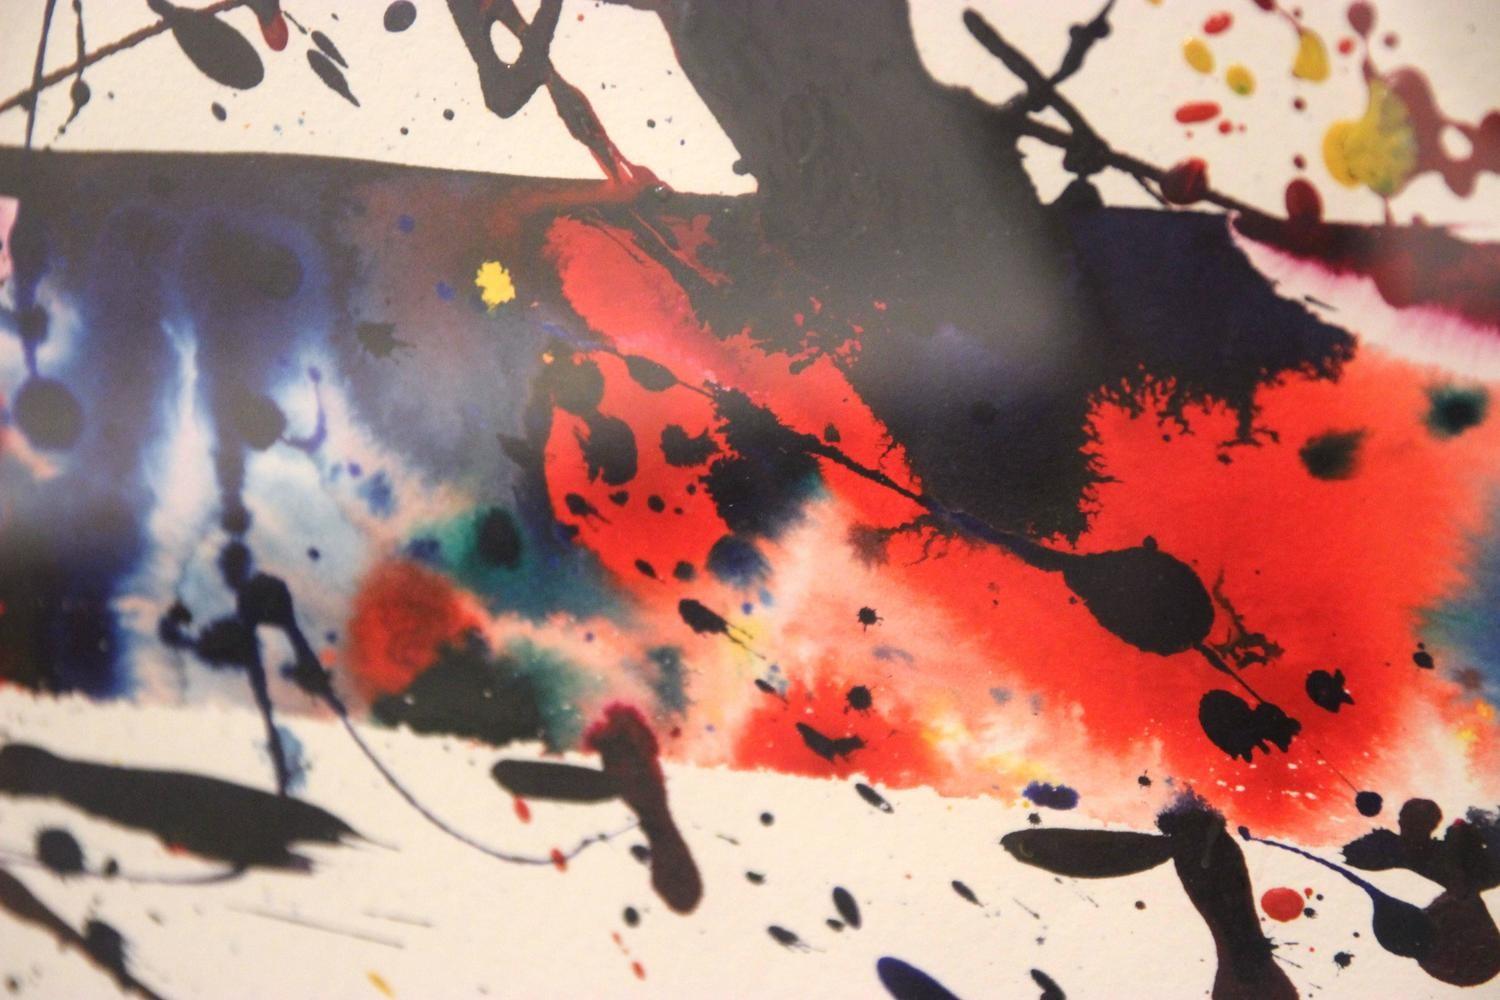 Sam Francis (1923-1994), Untitled (SF76 197), 1976,
Acrylic on paper, Signed and dated on the reverse.
Stamp of The Sam Francis Estate, Label of the Galleria Il Gabbiano,
Rome, certificate issued by The Sam Francis Estate, nSF76 197.

Measures: